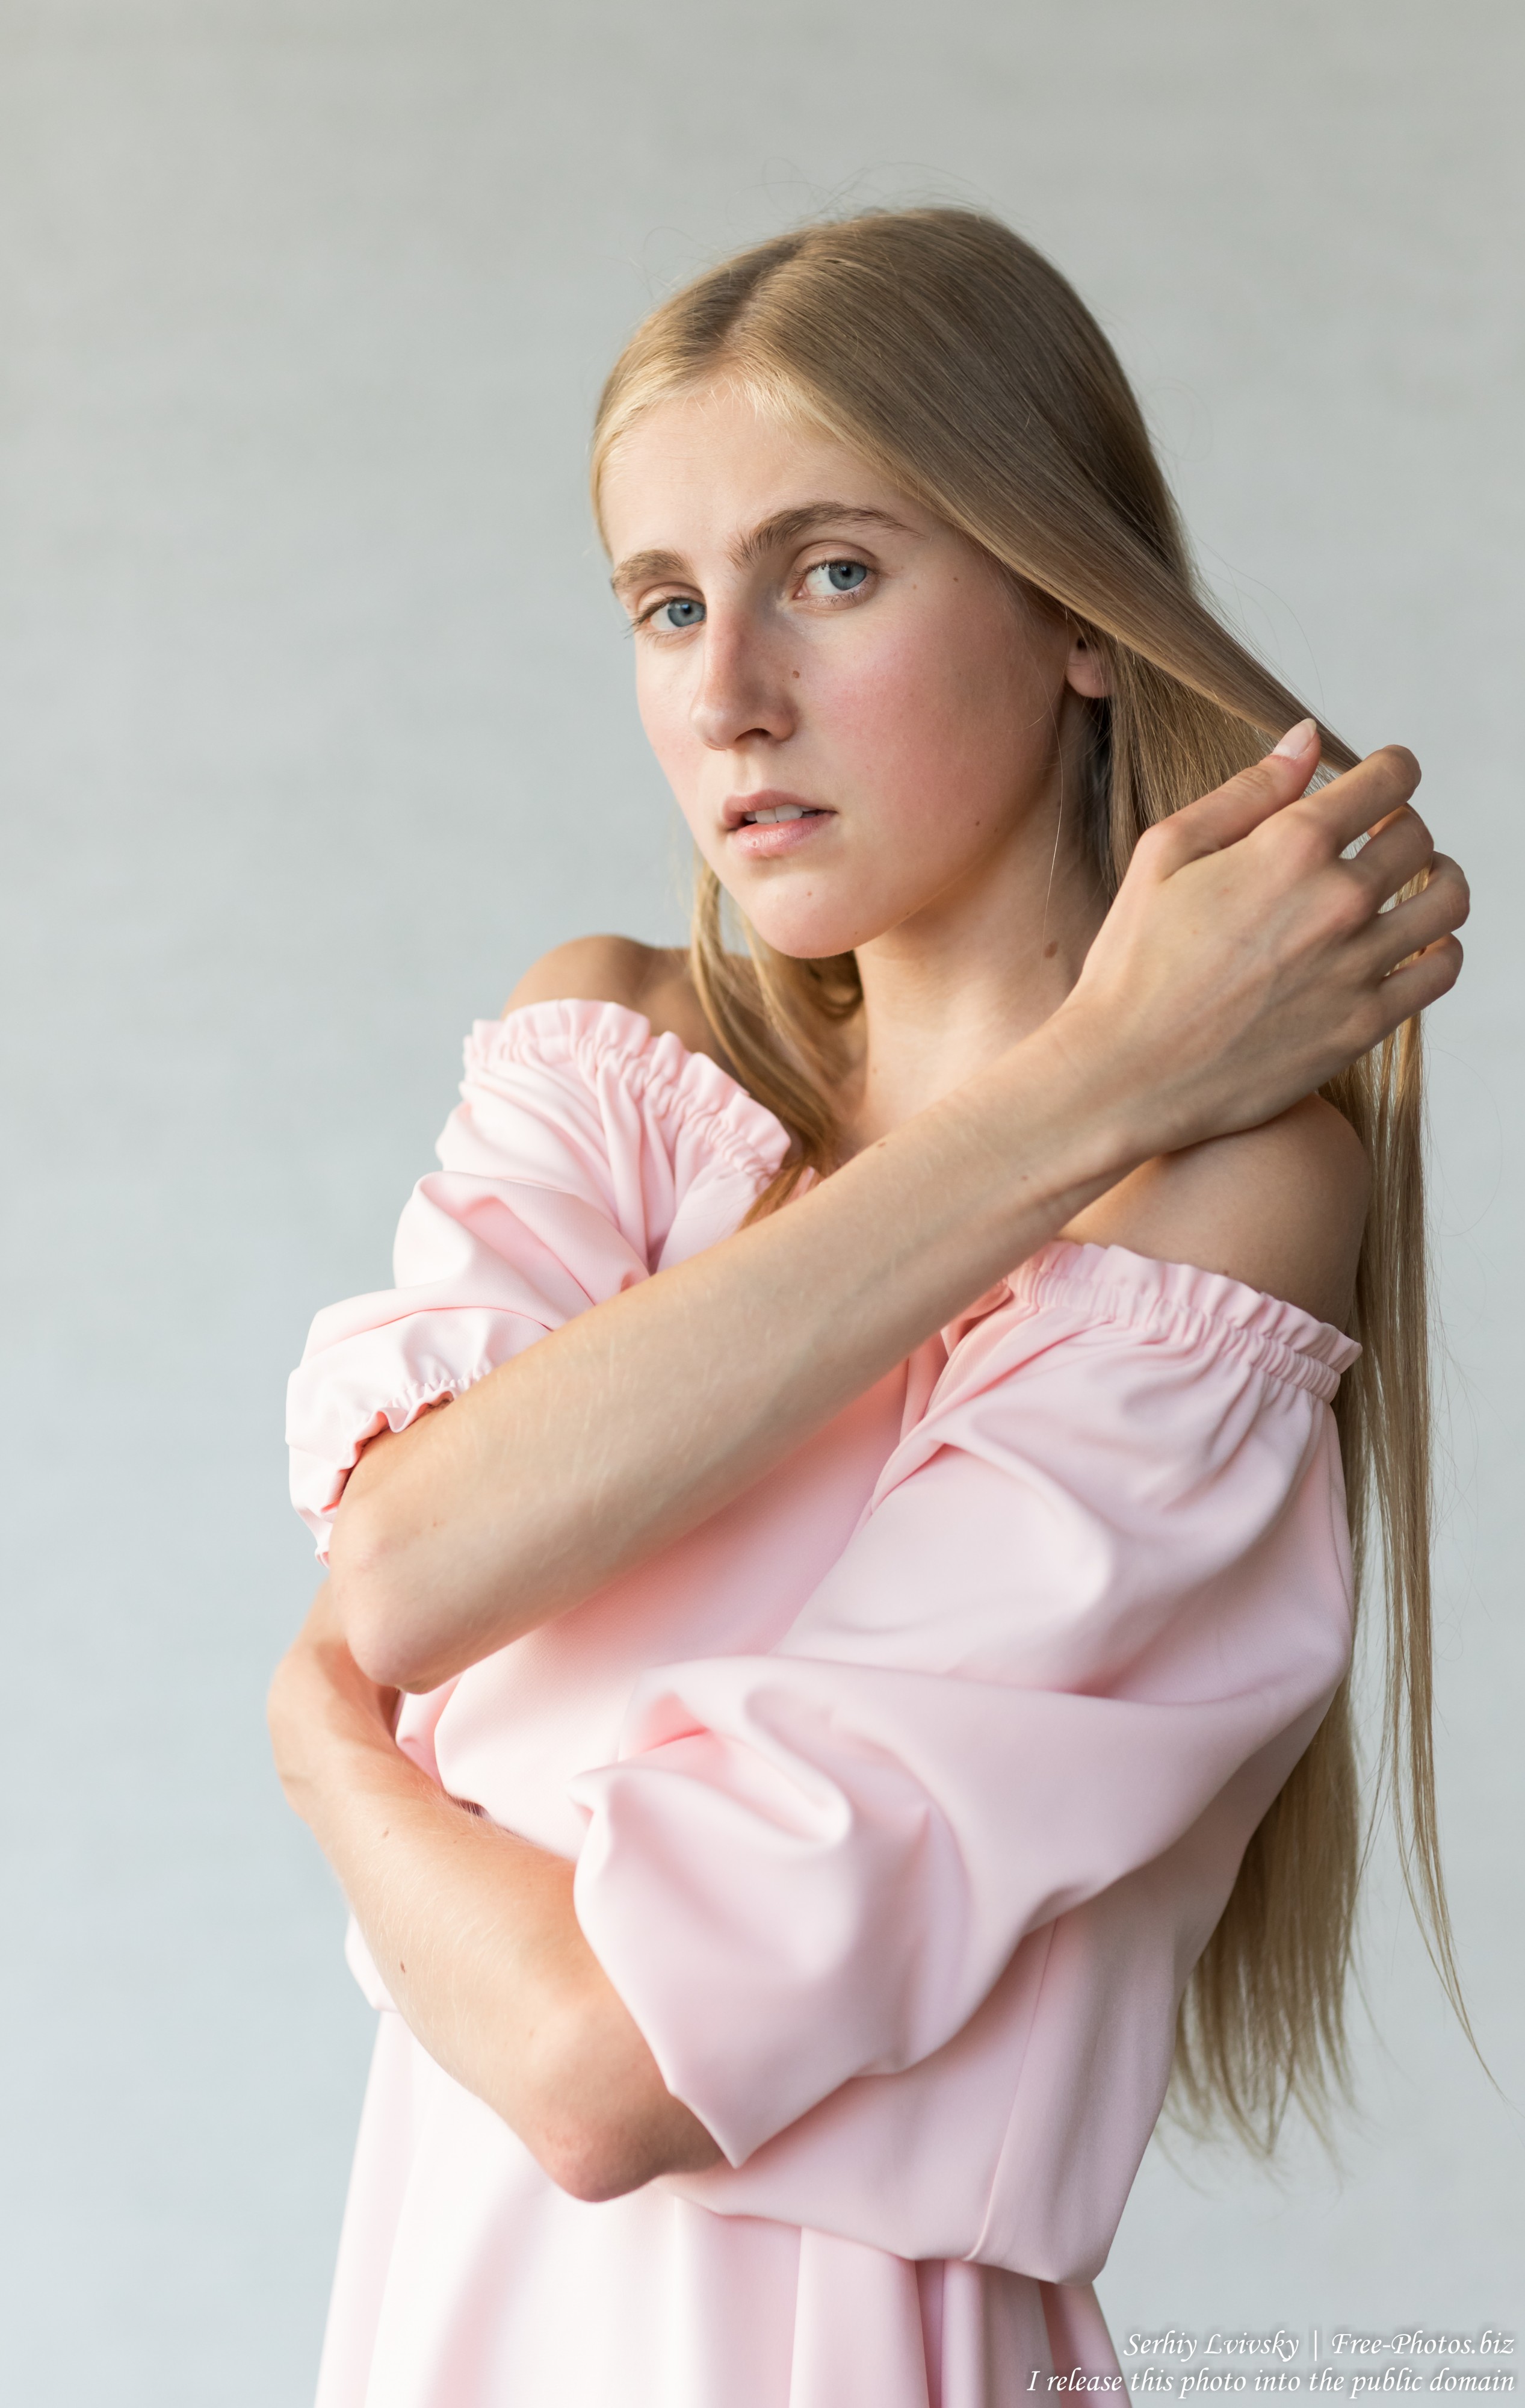 Katia - a 16-year-old natural blonde girl with blue eyes photographed in June 2019 by Serhiy Lvivsky, picture 1